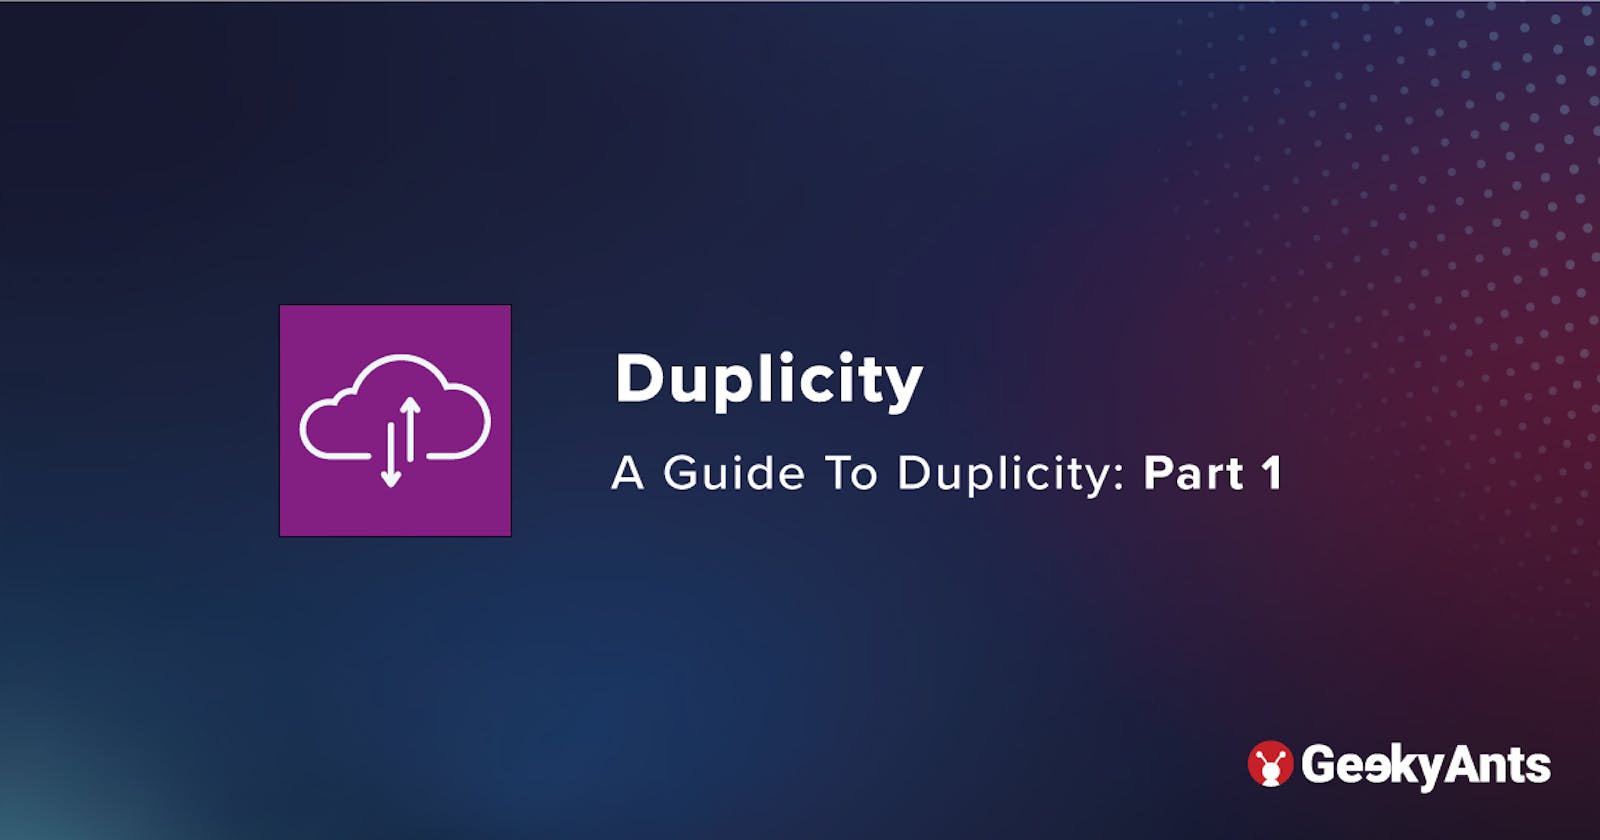 A Guide To Duplicity: Part 1